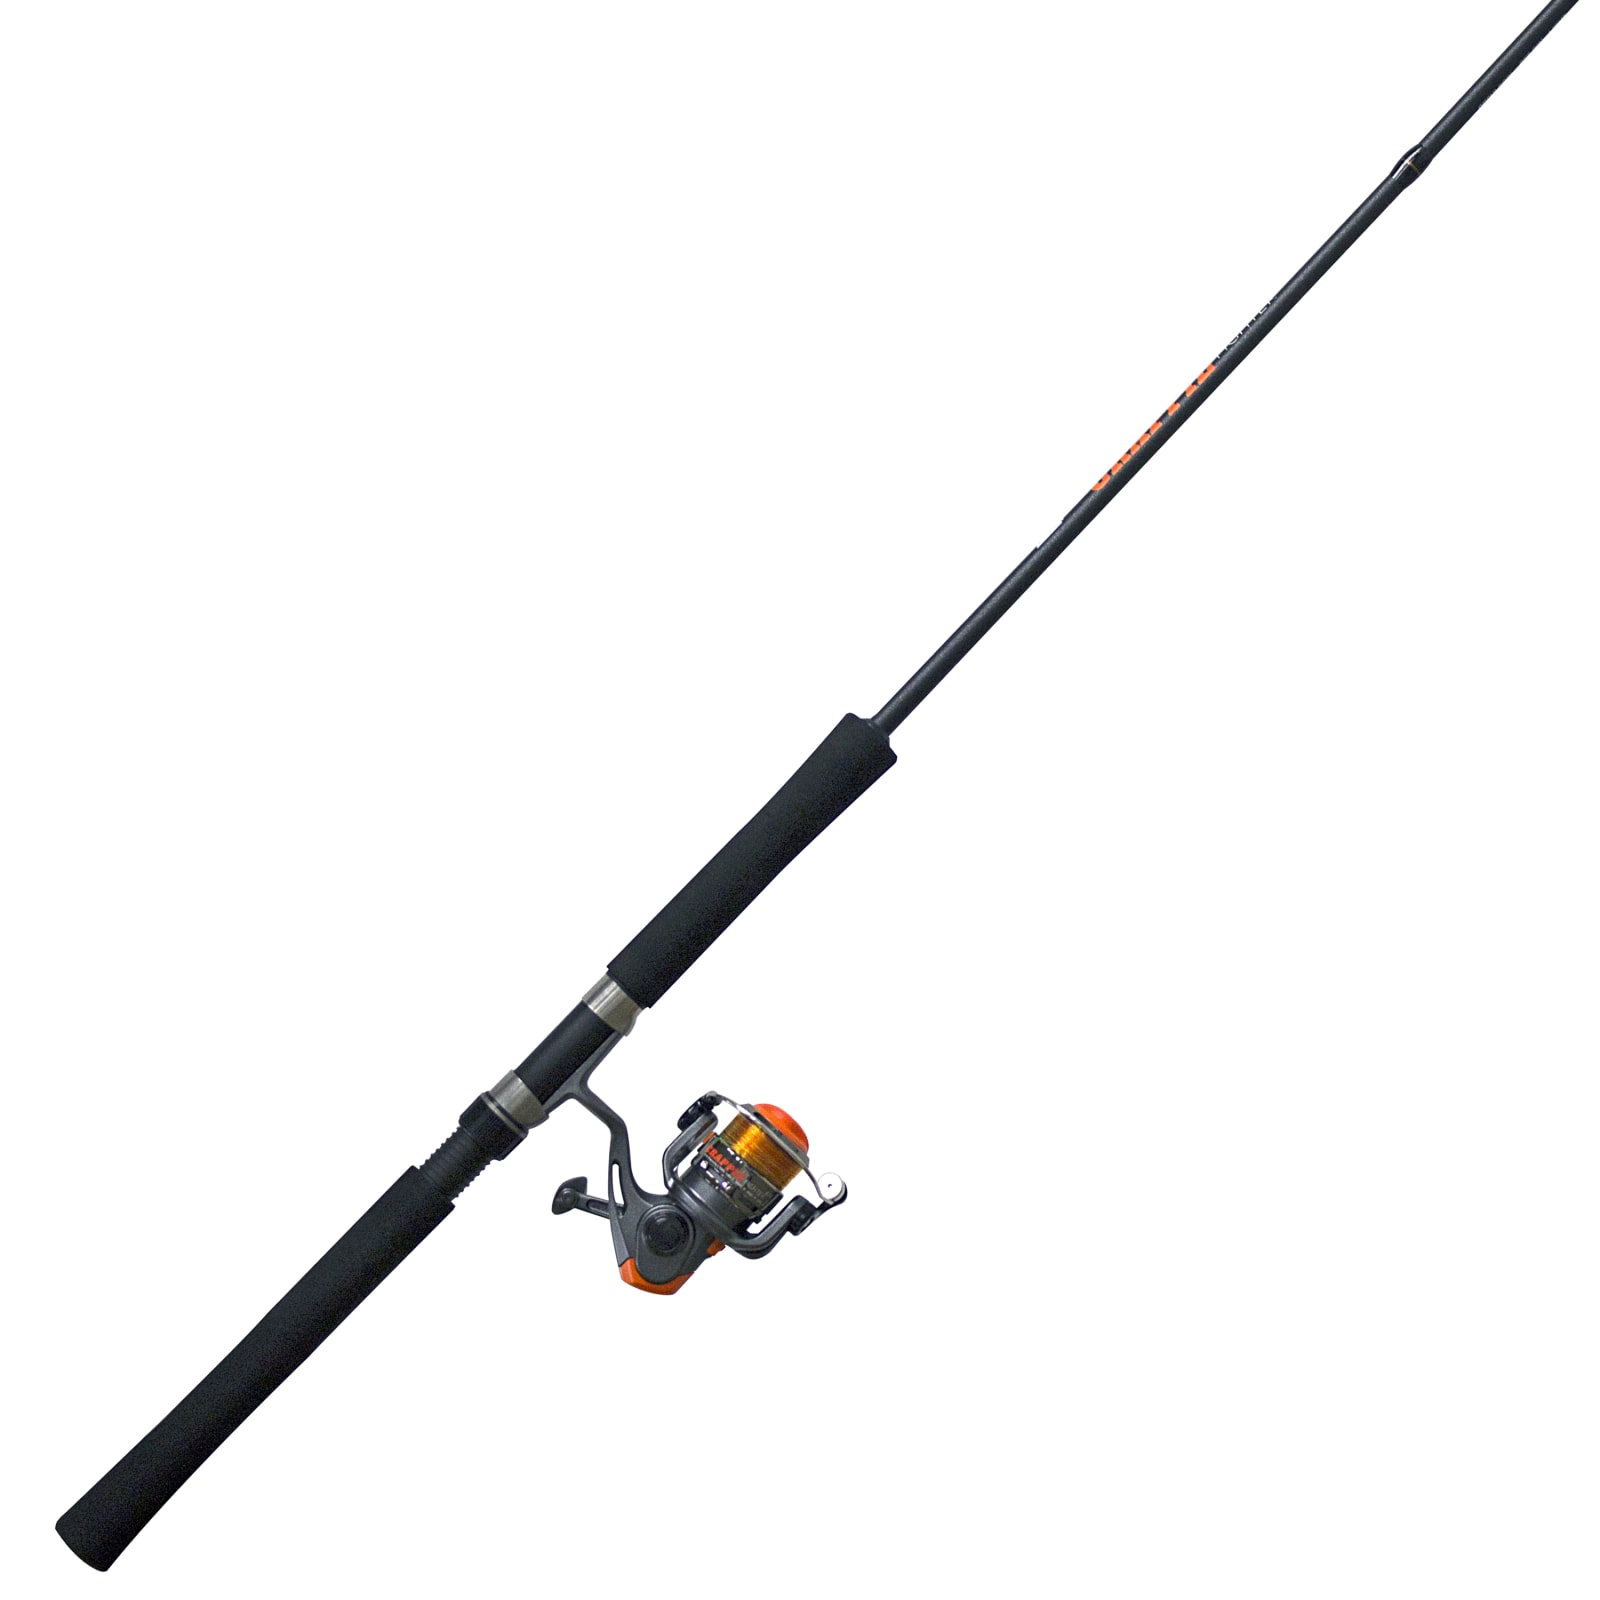 Gray/Orange Crappie Fighter Spinning Combo by Zebco at Fleet Farm